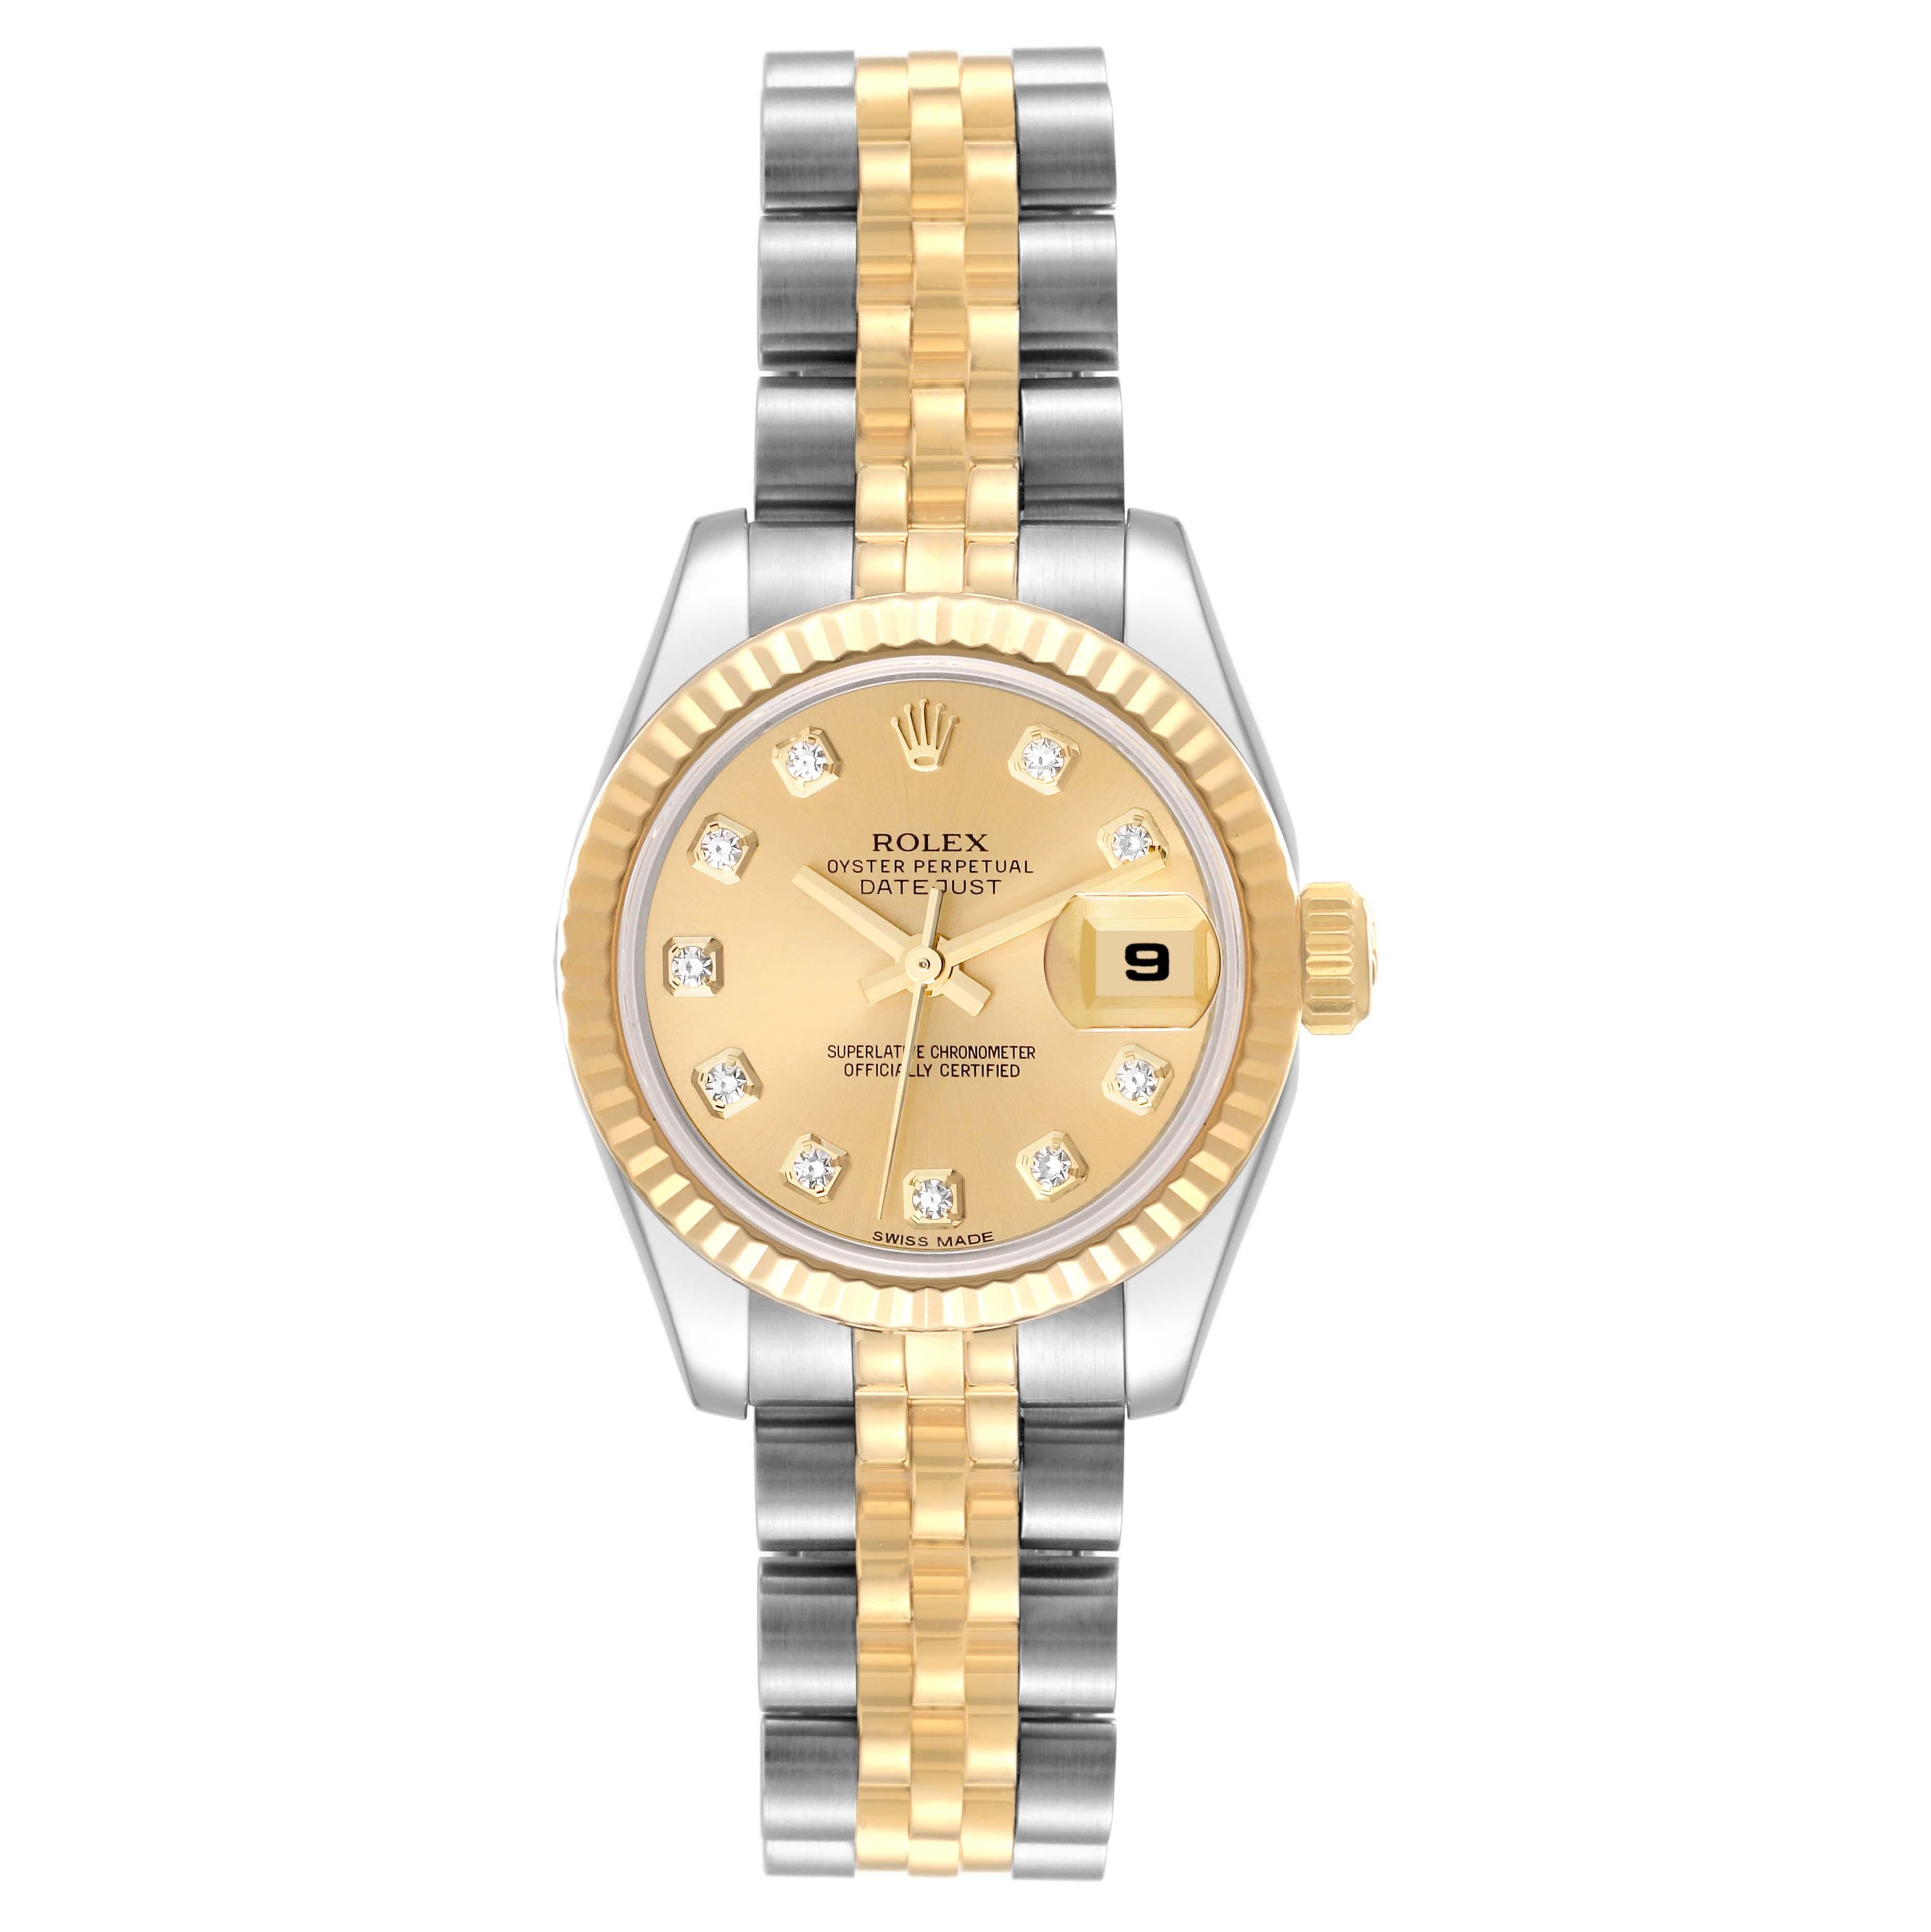 Rolex Datejust Steel Yellow Gold Diamond Dial Ladies Watch 179173 Box Card. Officially certified chronometer automatic self-winding movement. Stainless steel oyster case 26 mm in diameter. Rolex logo on an 18K yellow gold crown. 18k yellow gold